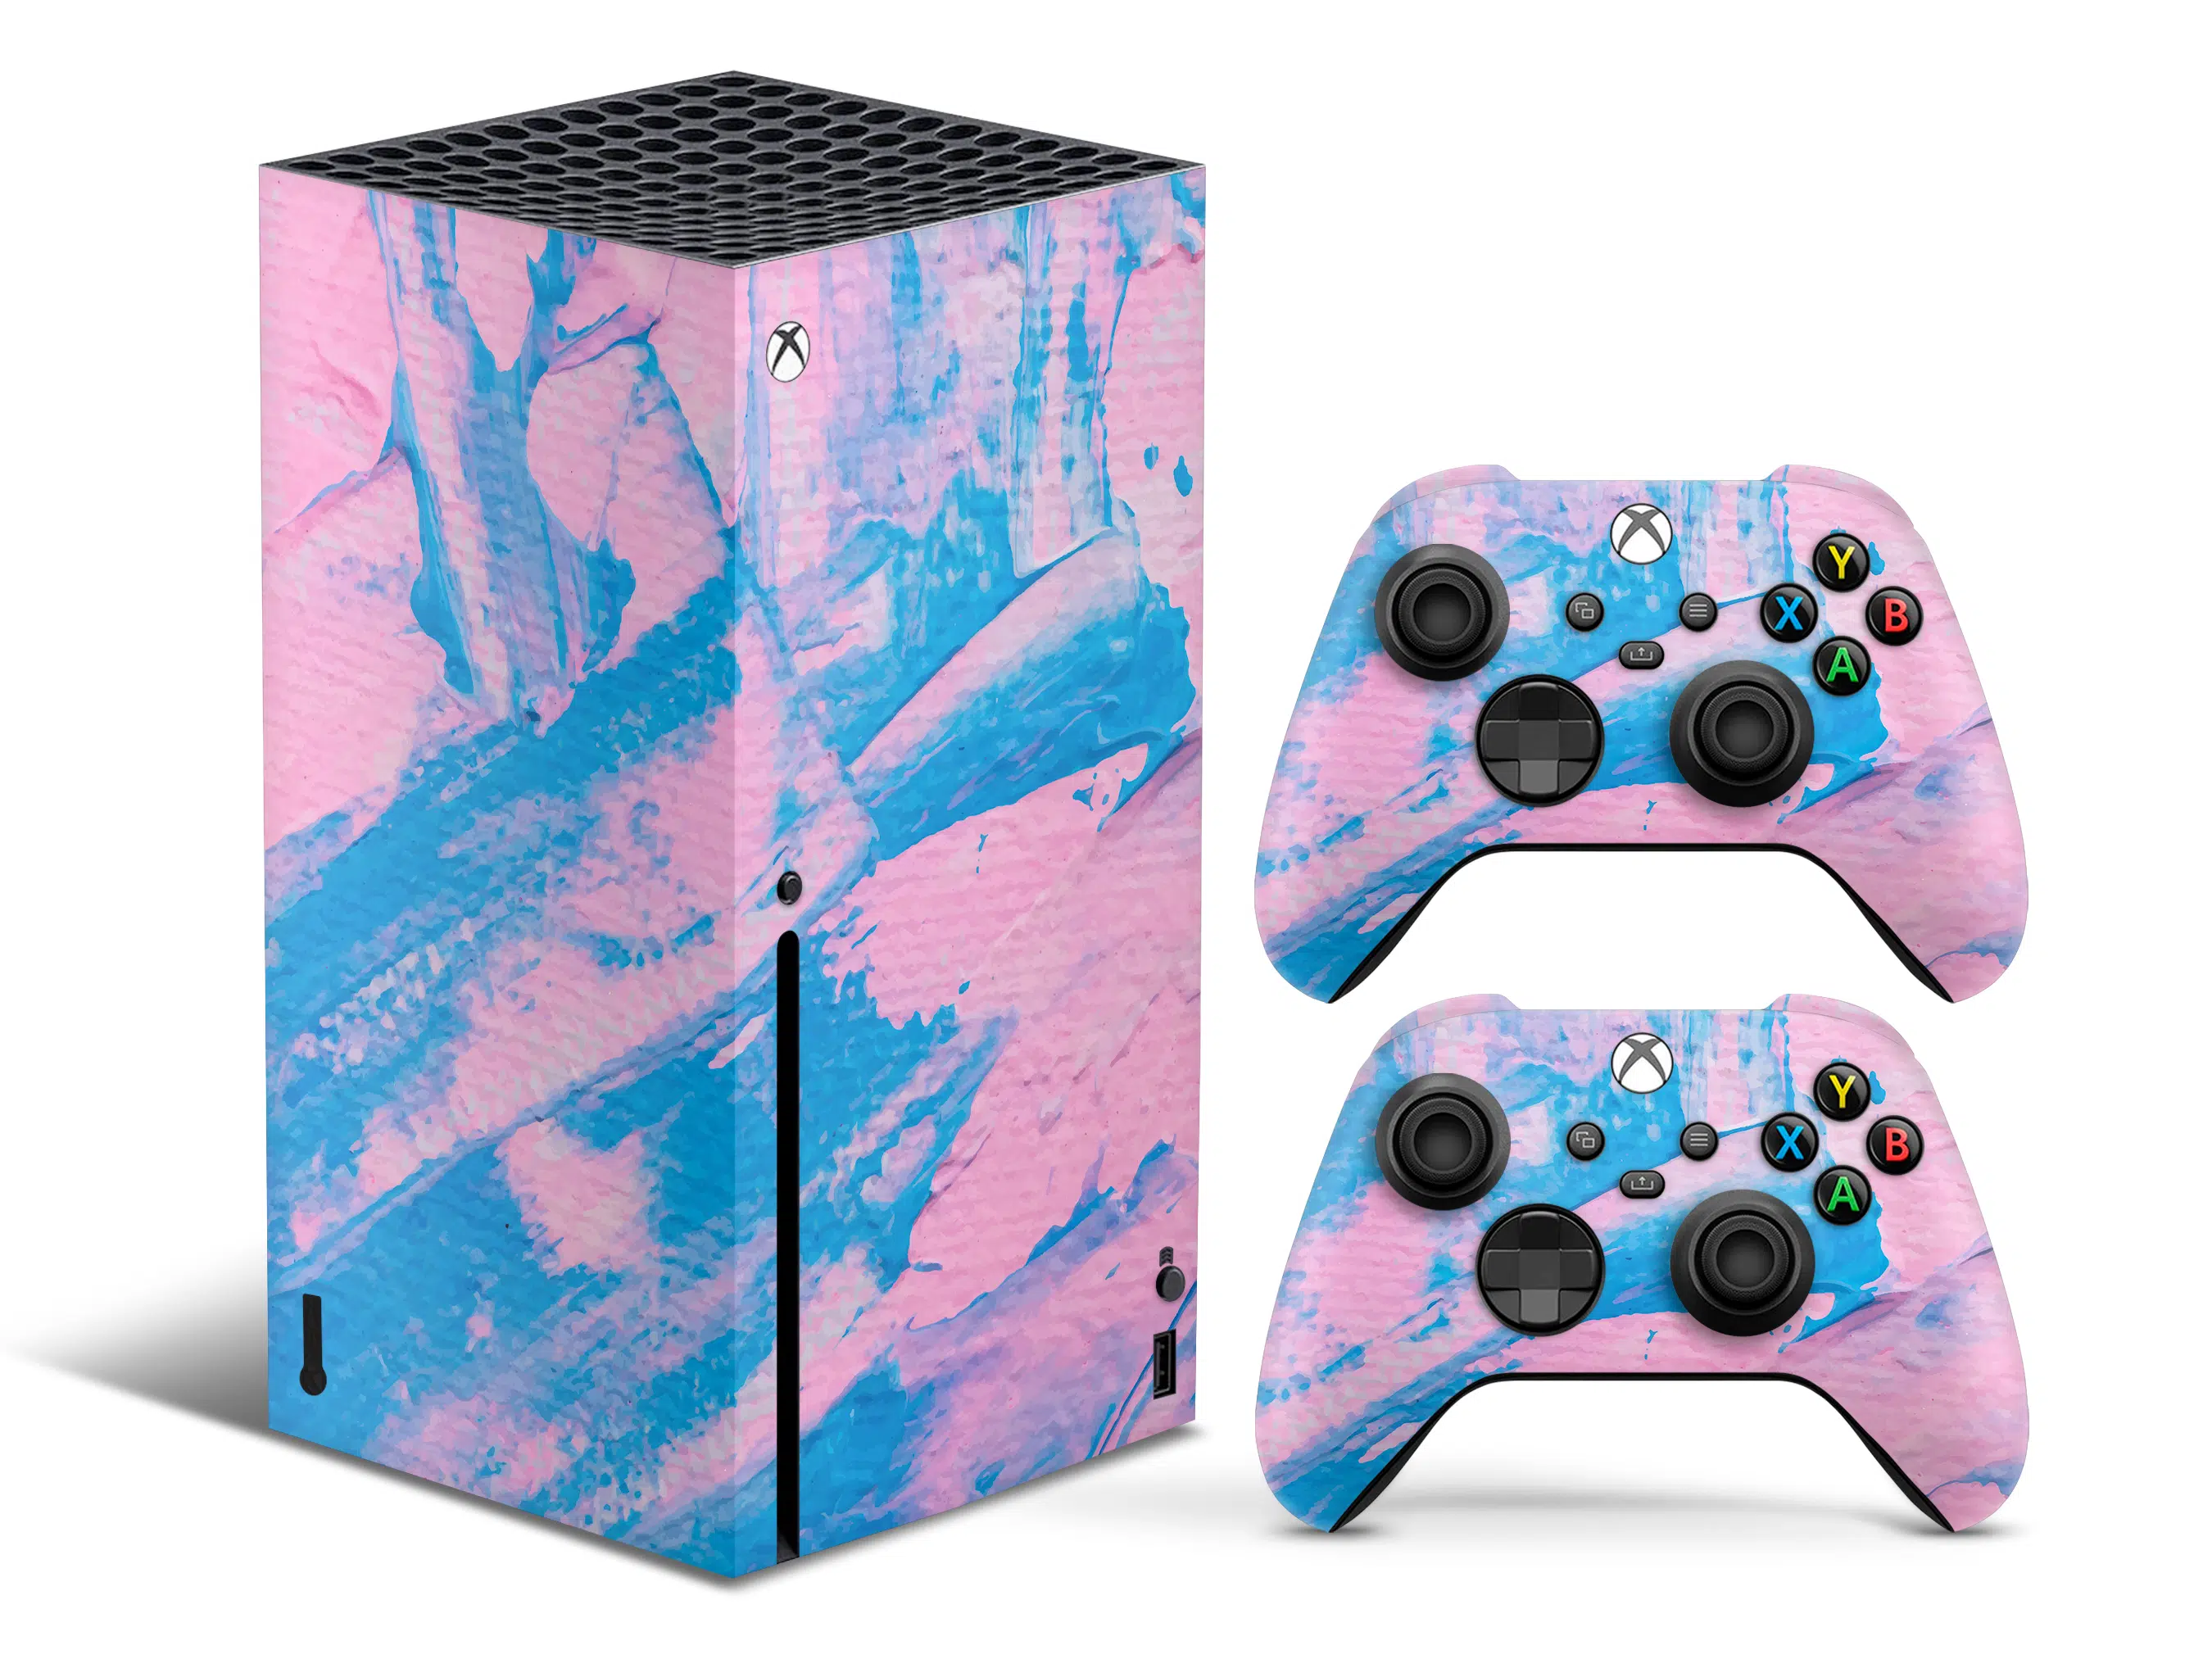 ABSTRACT PAINT XBOX SERIES X SKIN